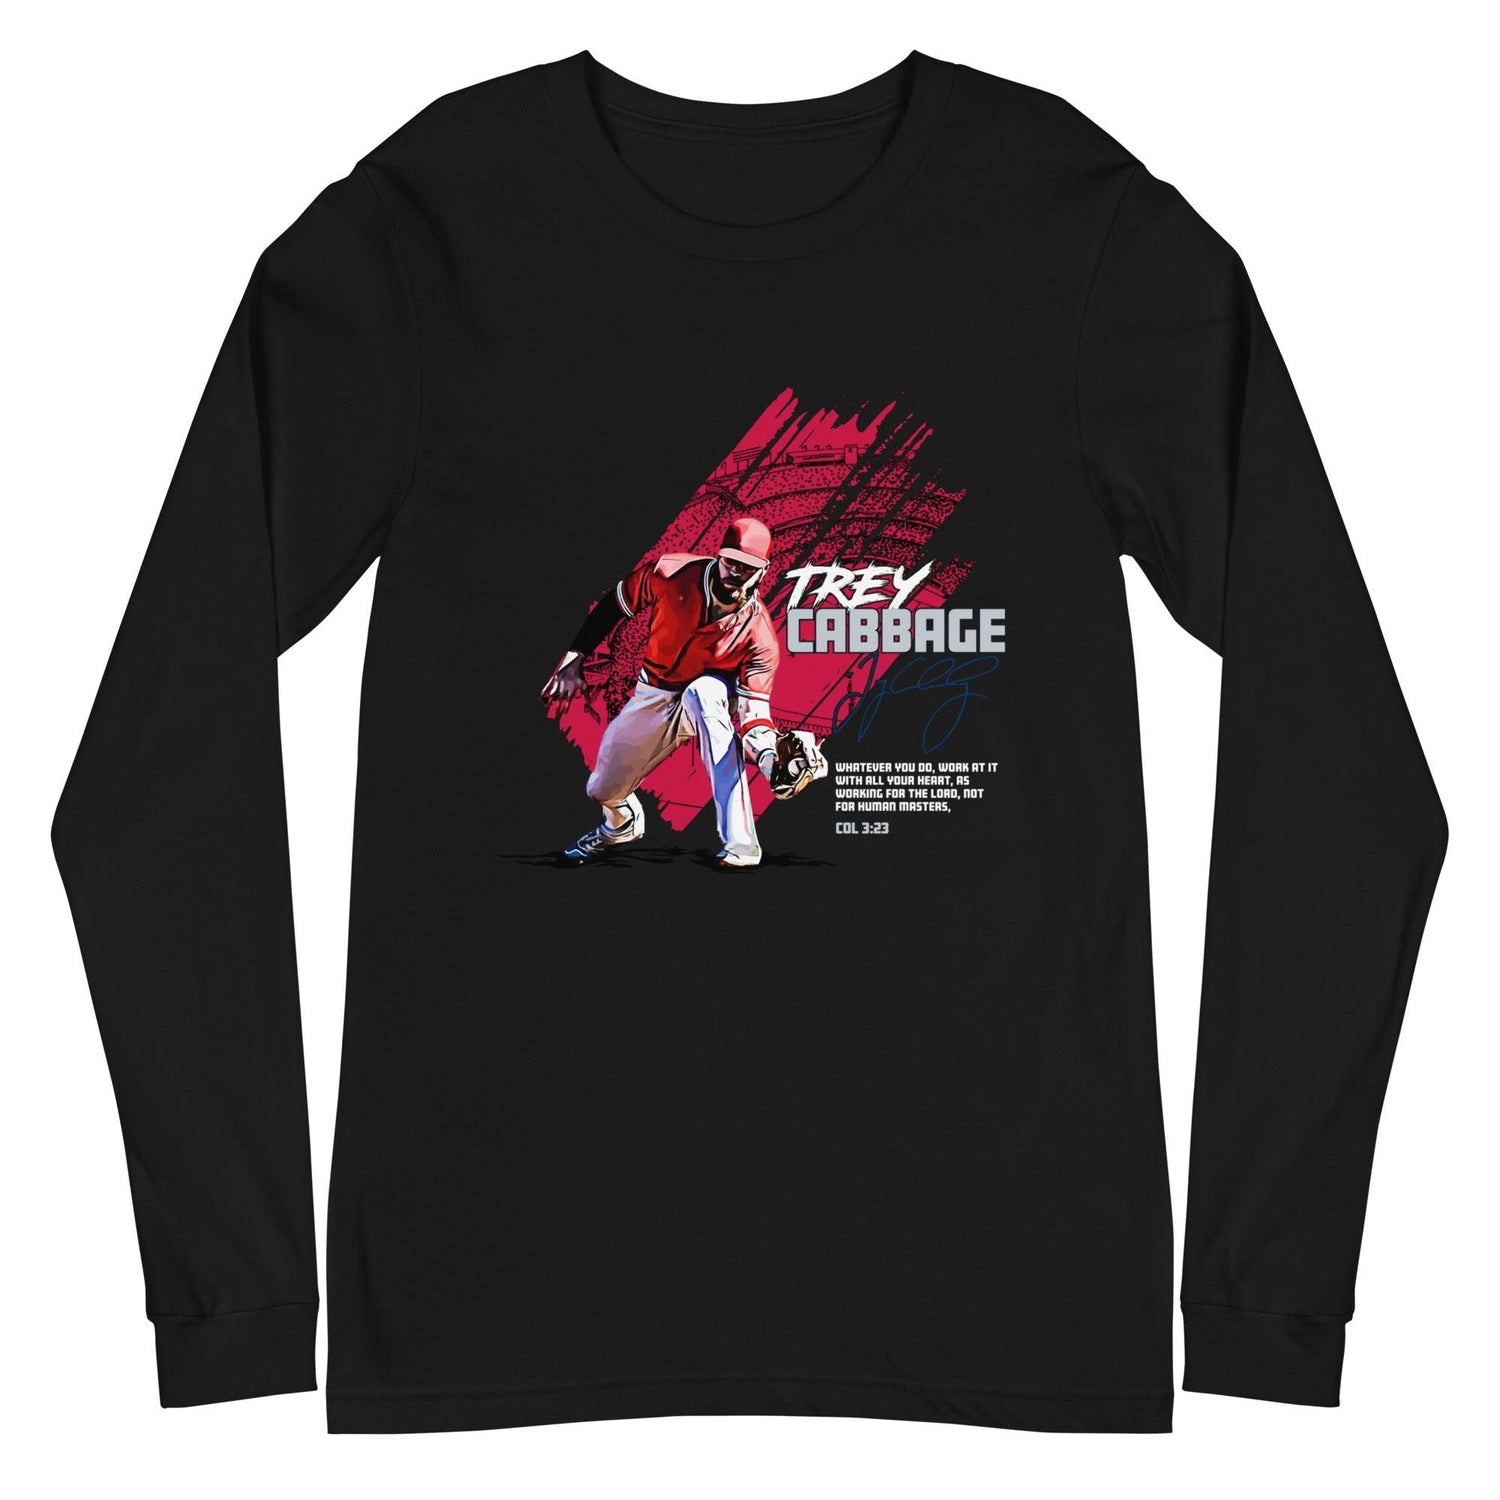 Trey Cabbage “Signature” Long Sleeve Tee - Fan Arch